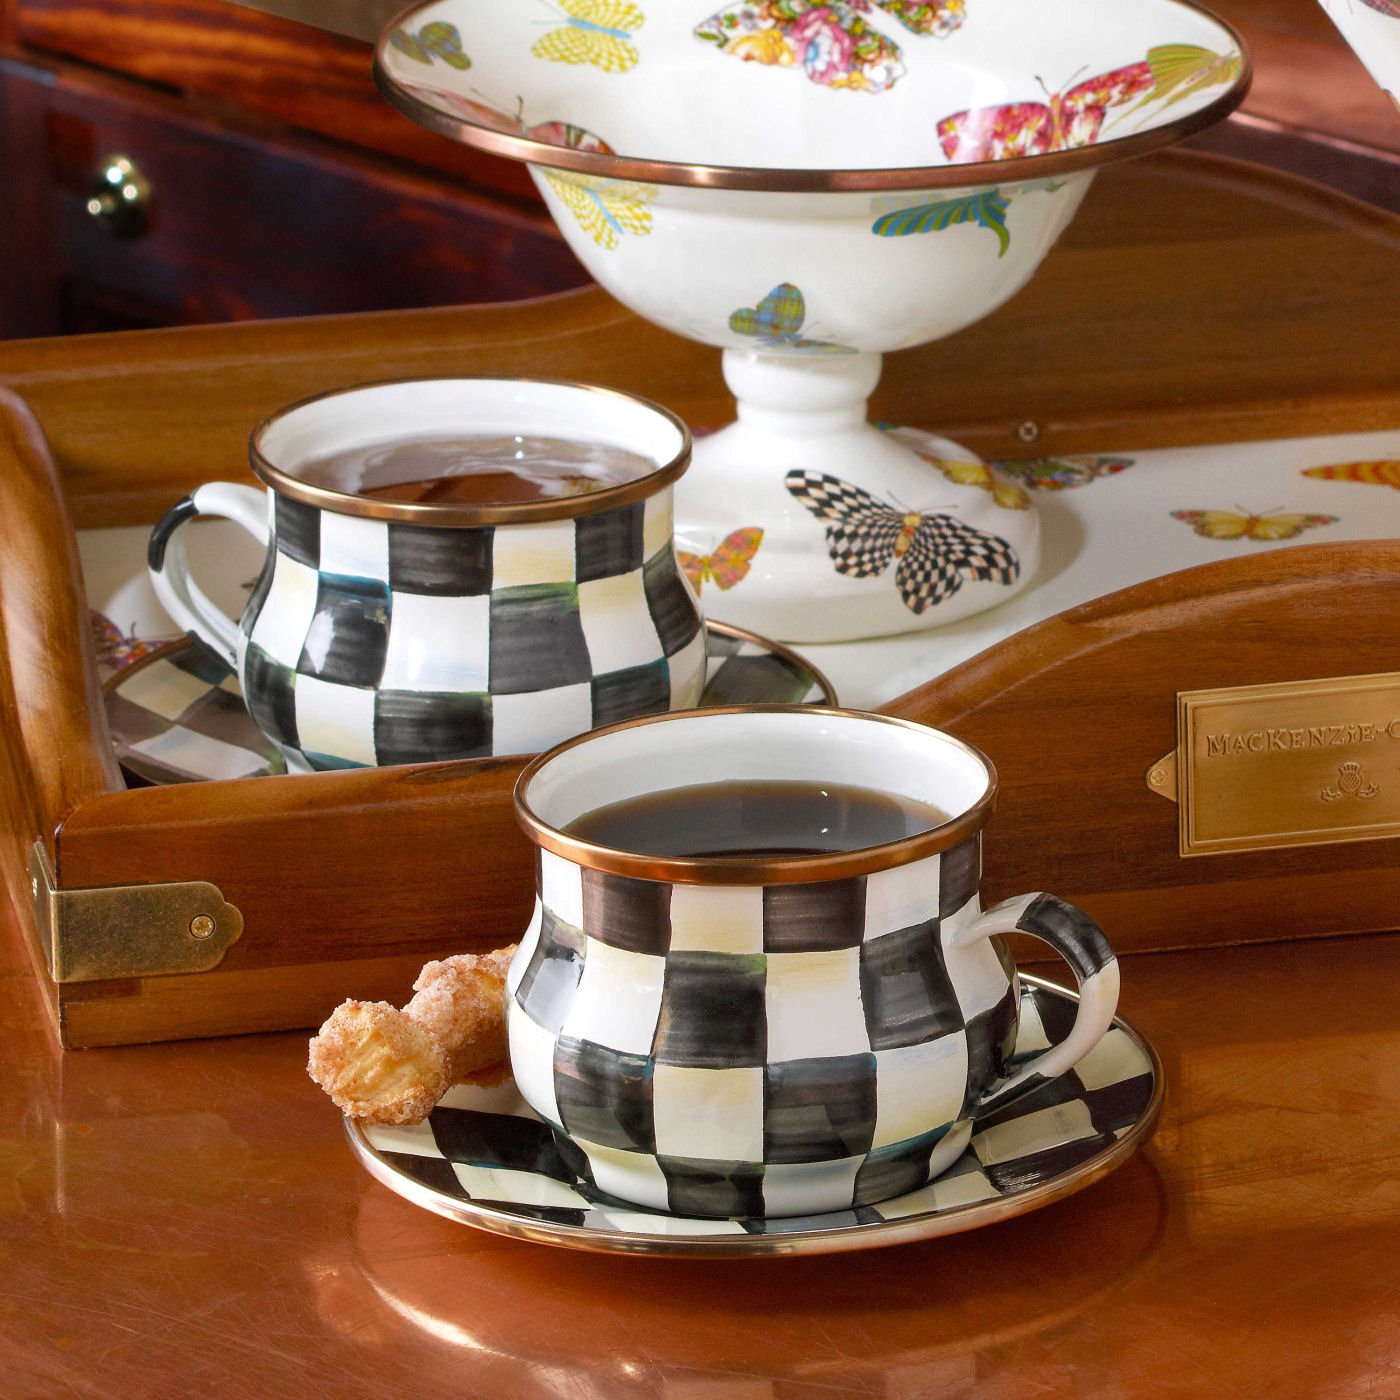 MacKenzie-Childs Courtly Check Enamel Teacup - |VESIMI Design| Luxury Bathrooms and Home Decor